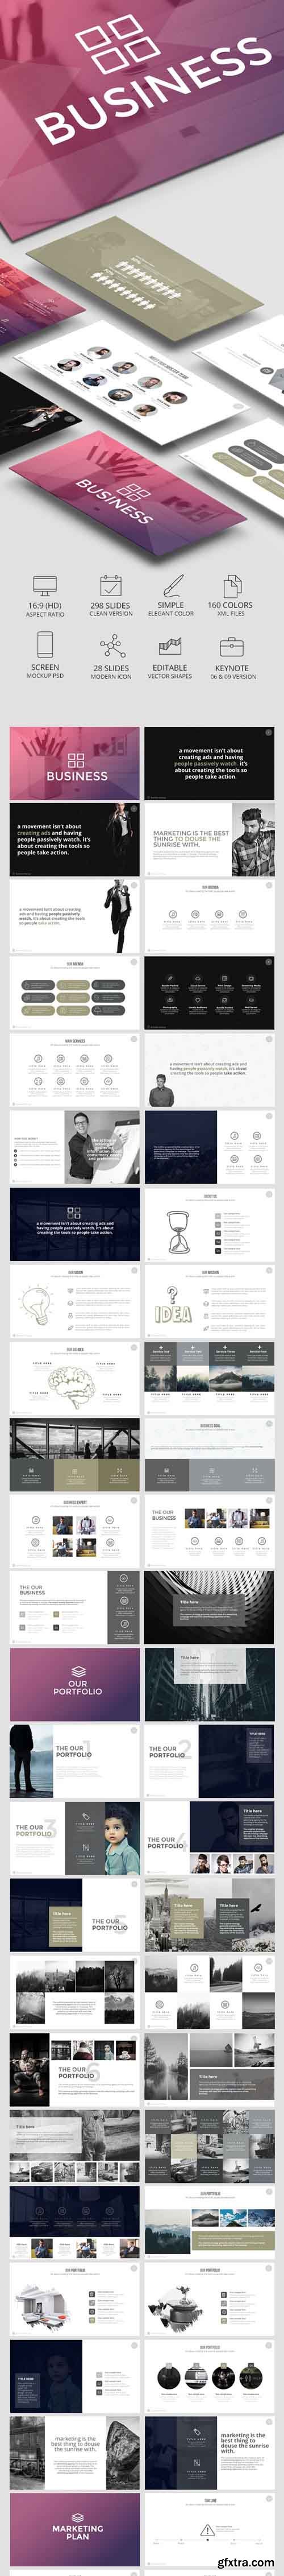 GR - Business - Simple Powerpoint 16573837